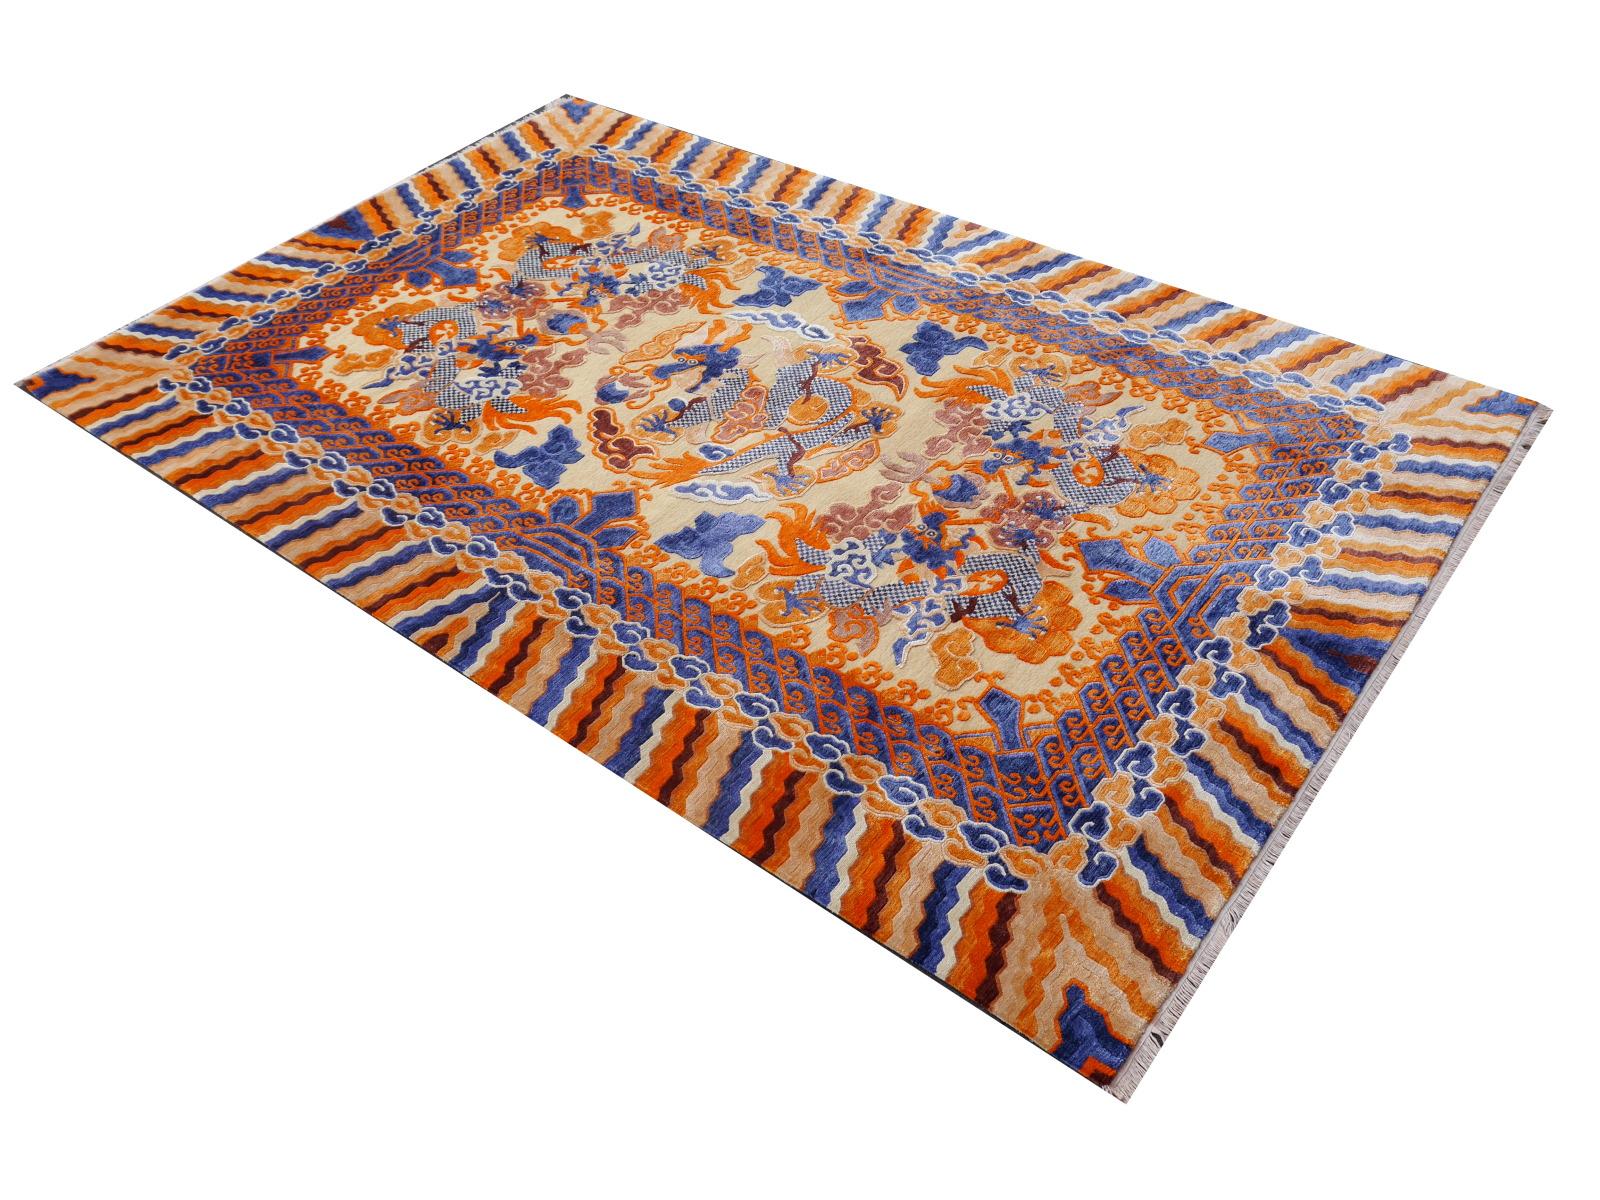 Khotan Dragon Design Rug Wool and Silk in Style of Chinese Kansu Carpets For Sale